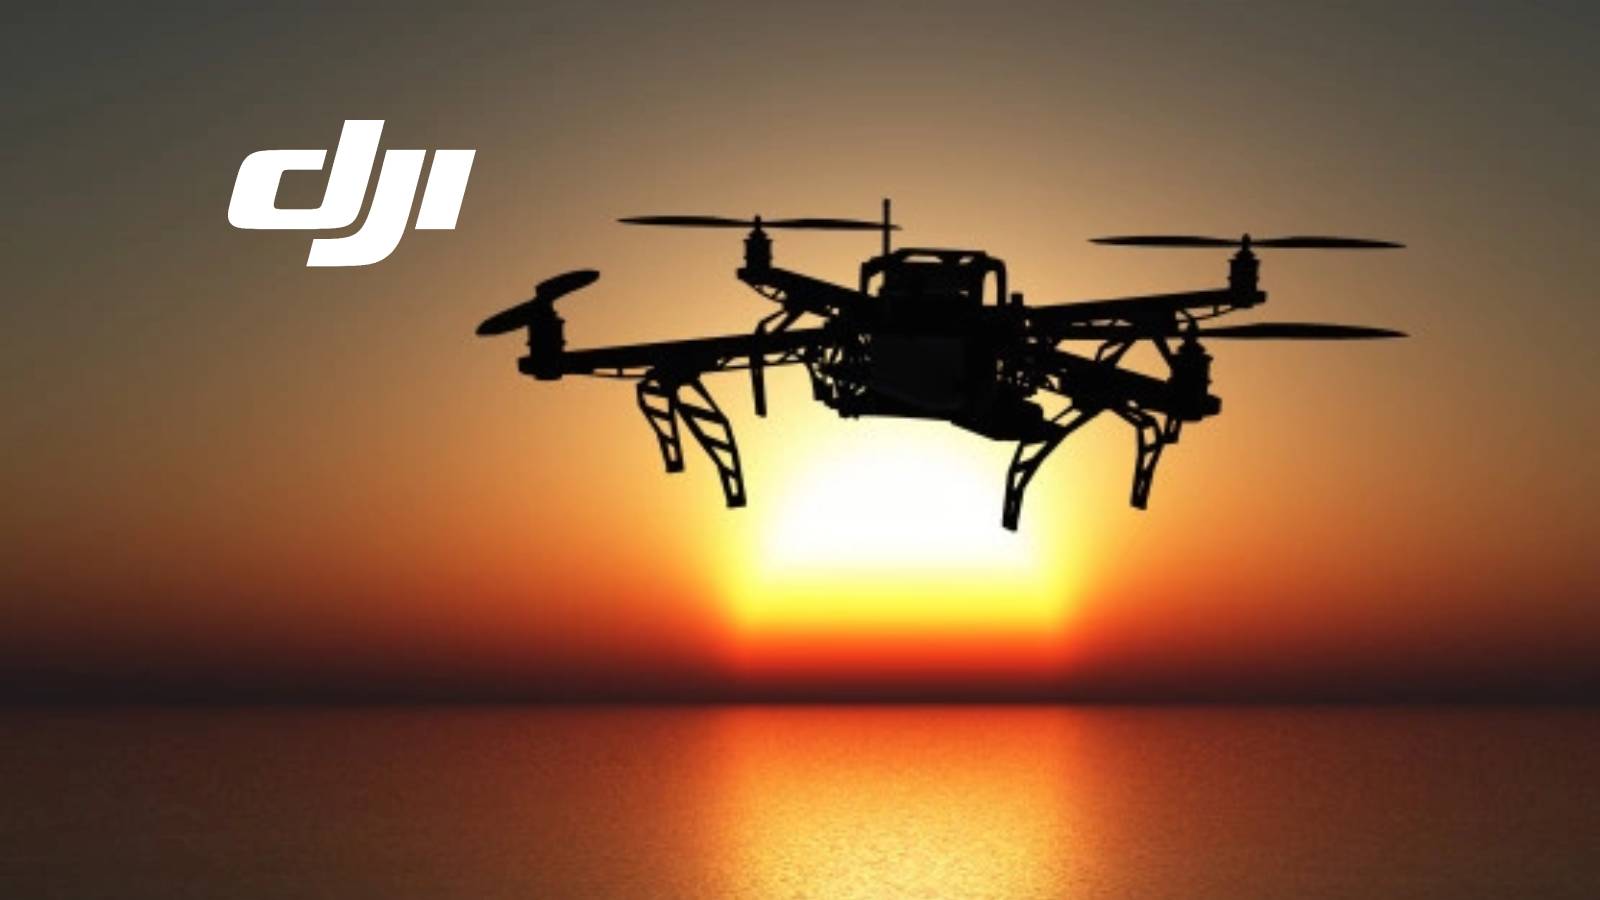 Meet DJI Mini The Ultra Light, Feature Packed, Easy To Fly Drone You've Been Waiting For